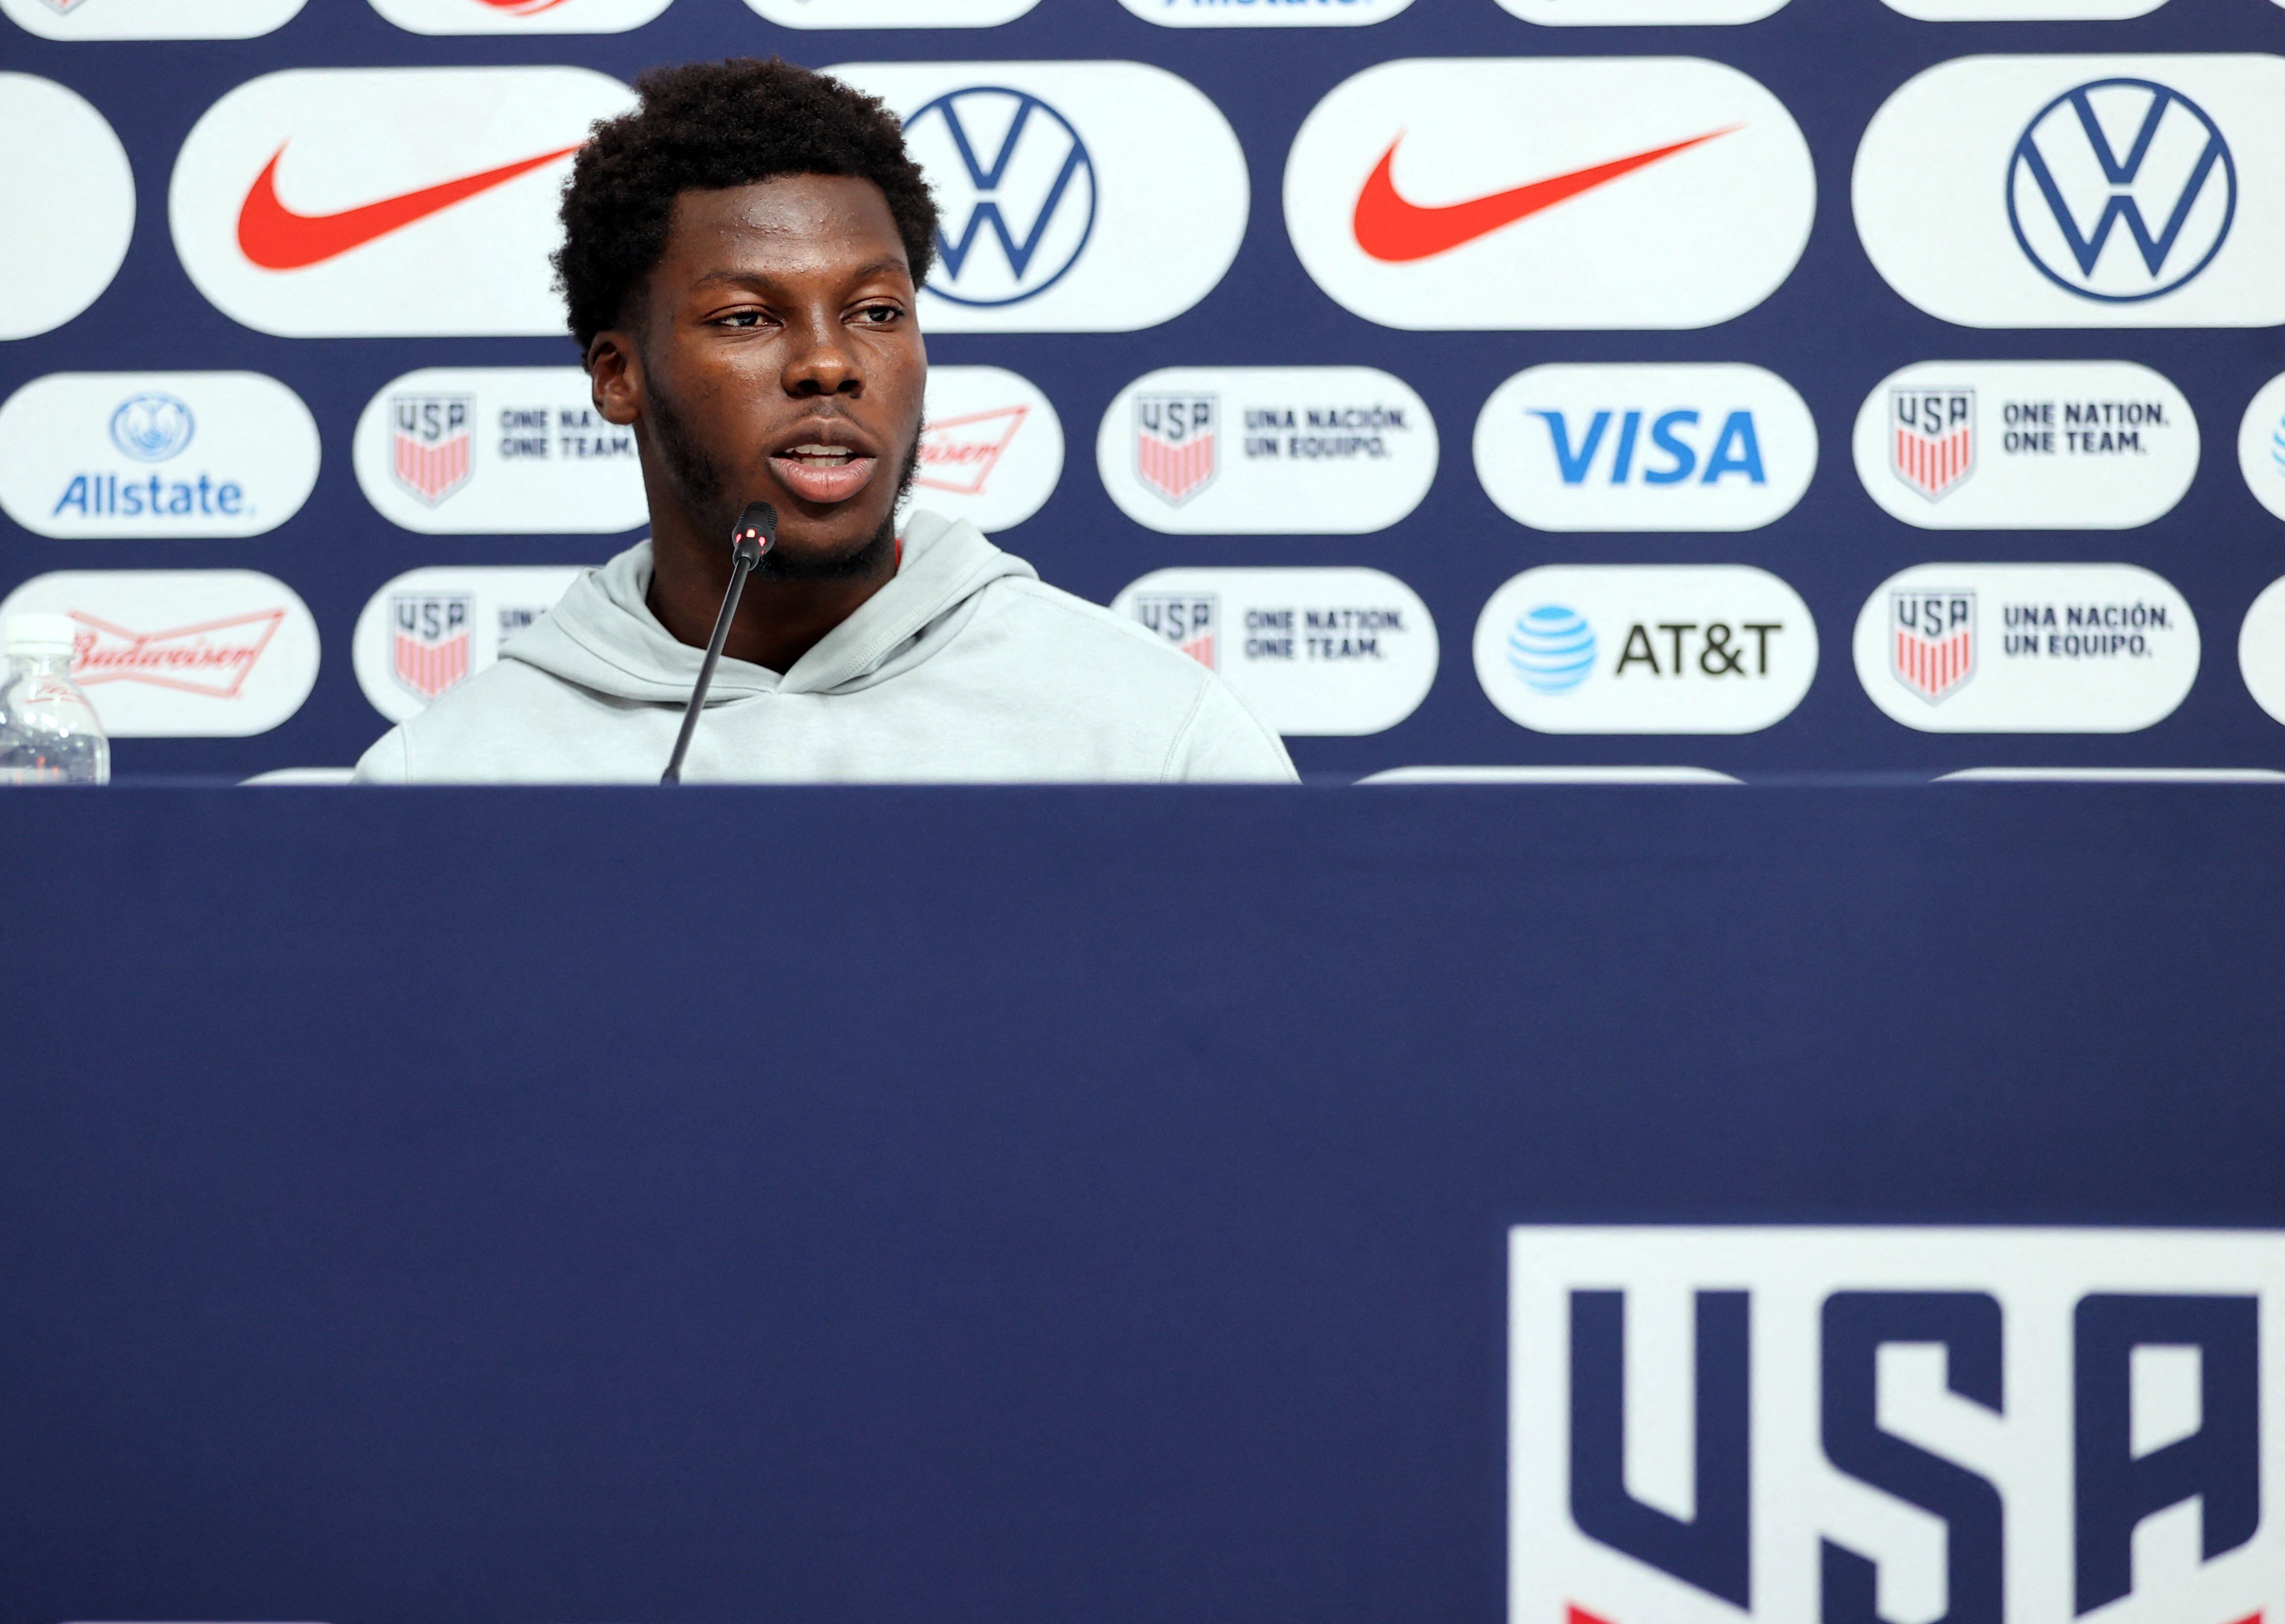 Yunus Musah will become the youngest soccer player to debut with the United States National Team in a World Cup: 19 years and 358 days (REUTERS / Ibraheem Al Omari).